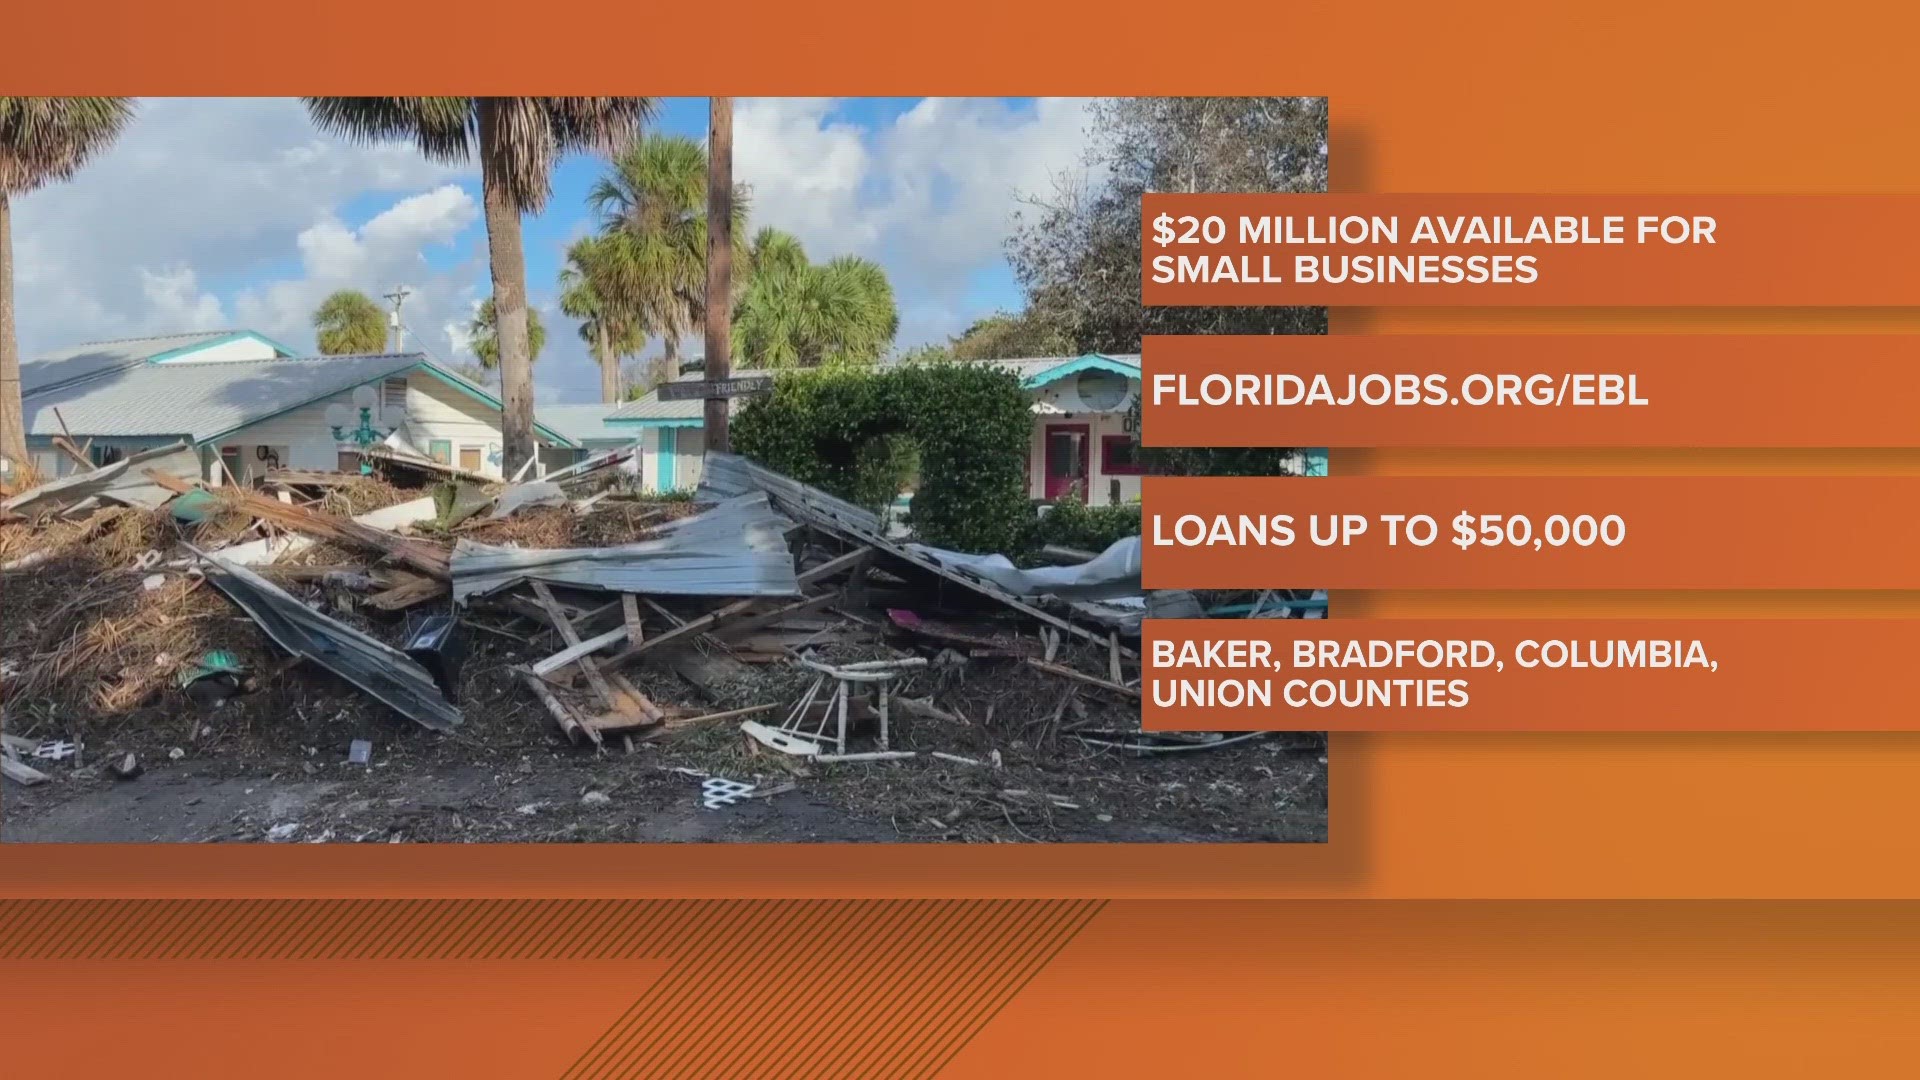 Gov. DeSantis activated Florida's Small Business Emergency Bridge Loan program in which business owners can visit floridajobs.org/ebl to apply for loans up to $50K.